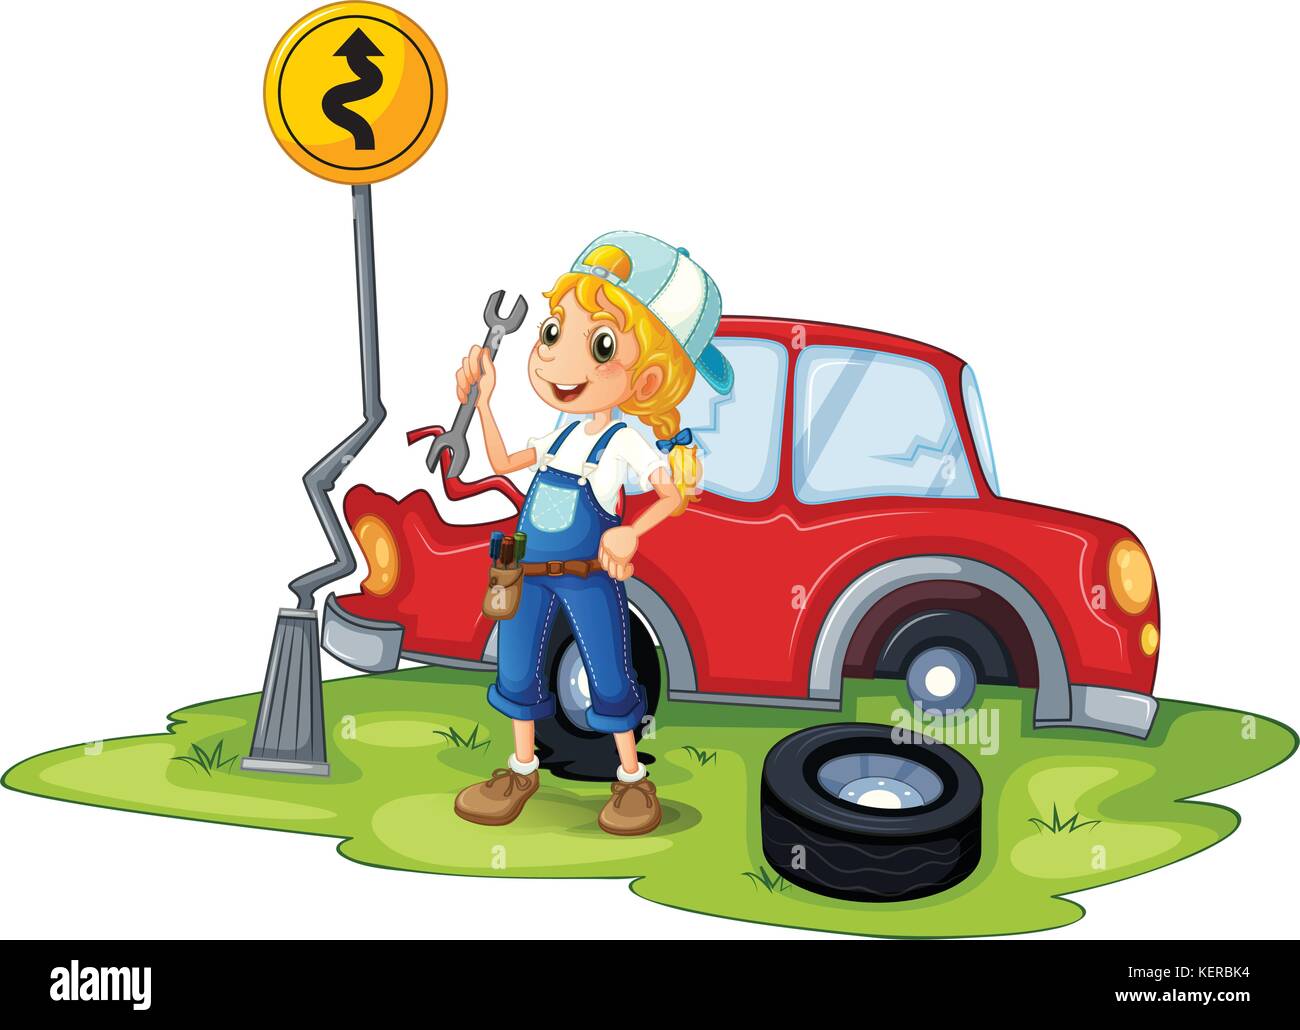 fixing cars clipart images